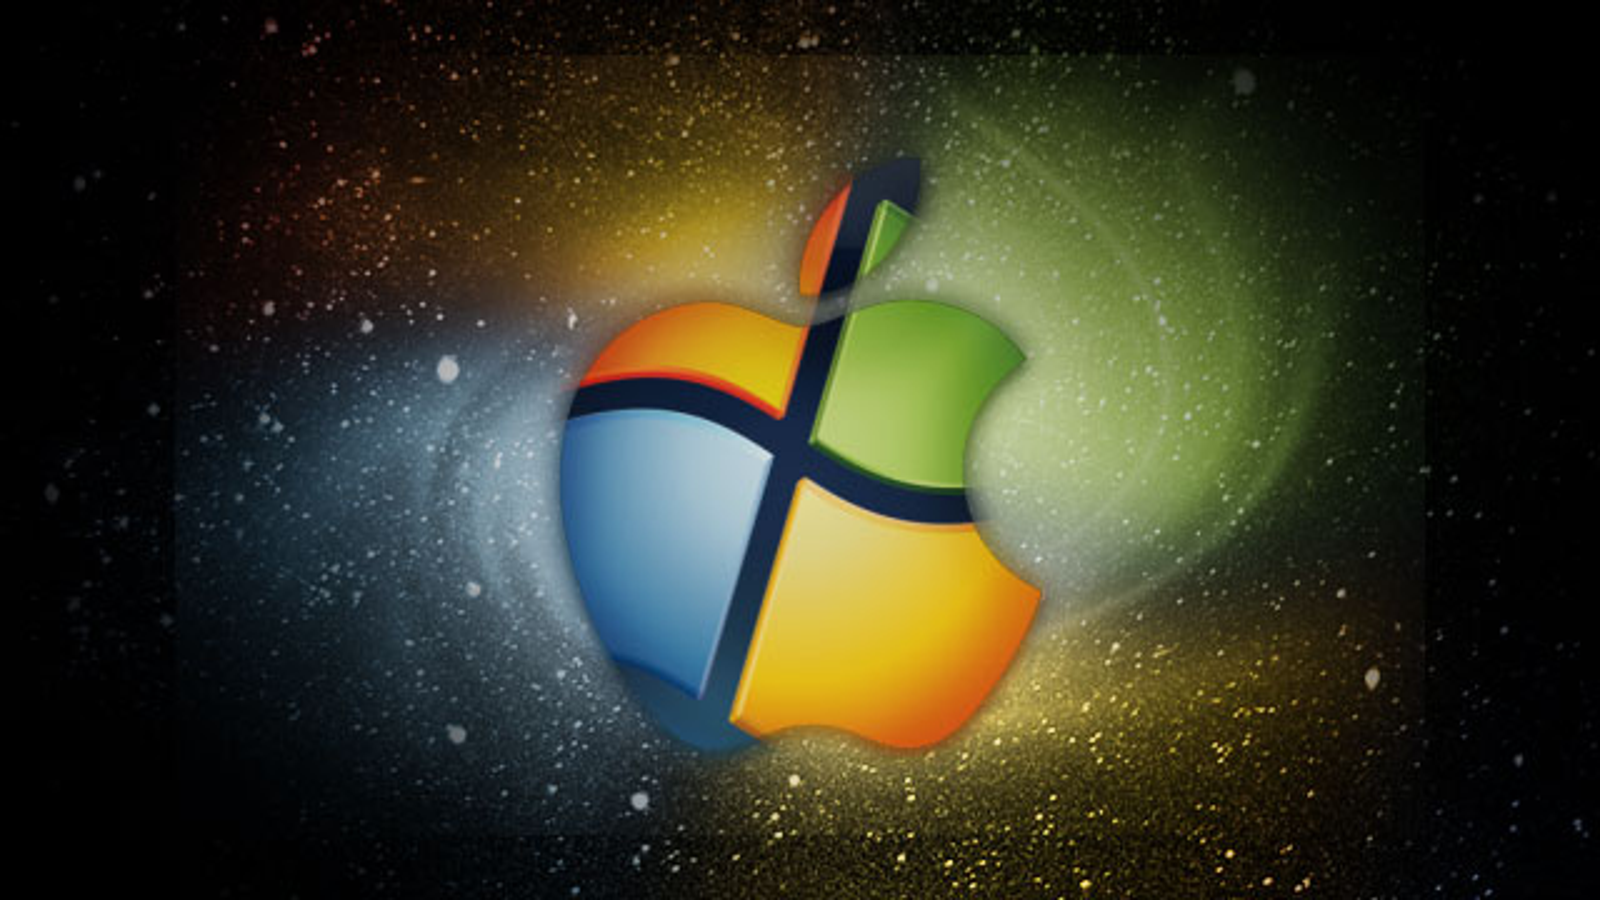 games for mac os x 10.6.8